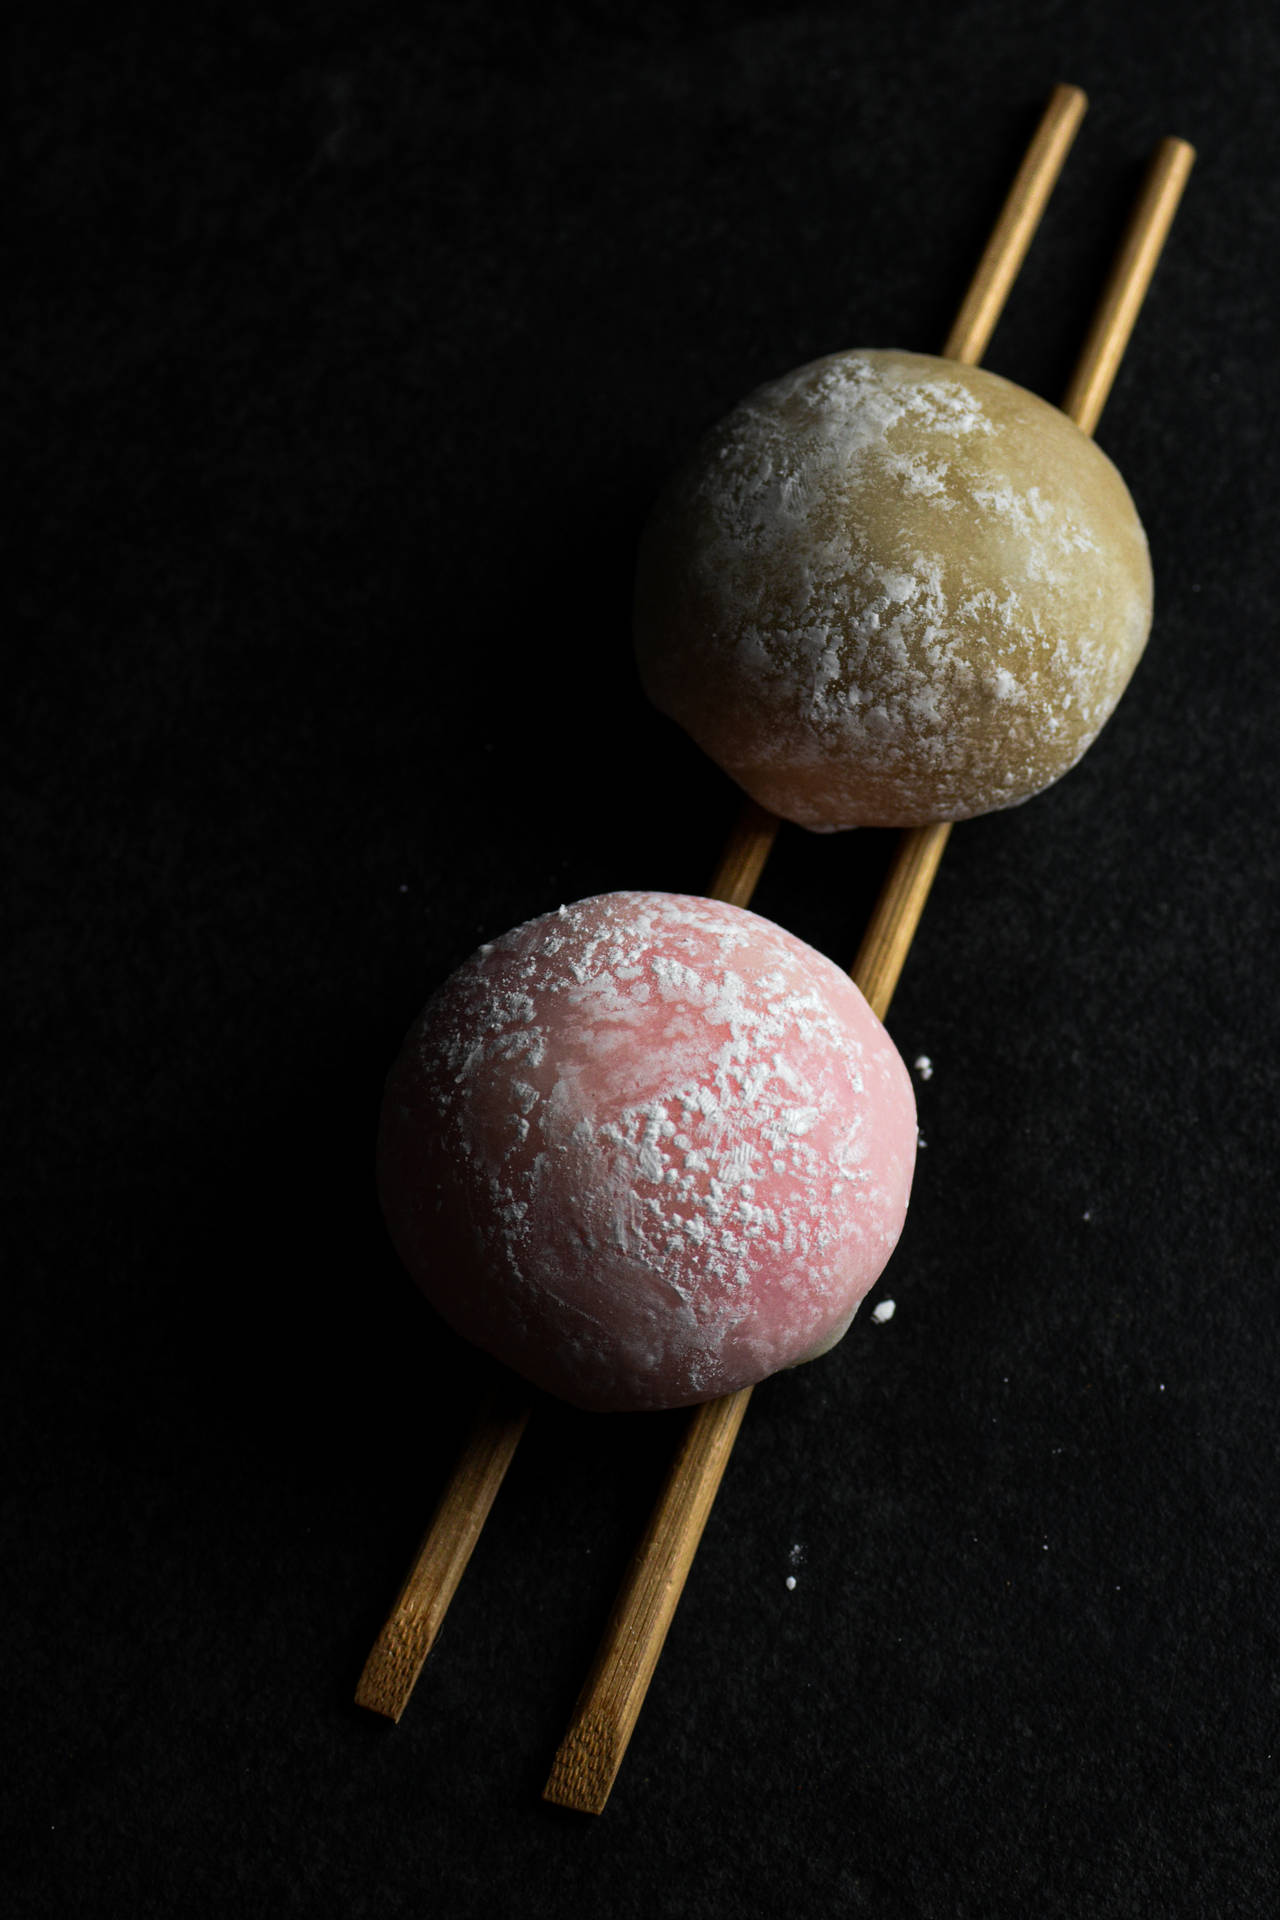 Two Mochi Pieces On Chopsticks Background